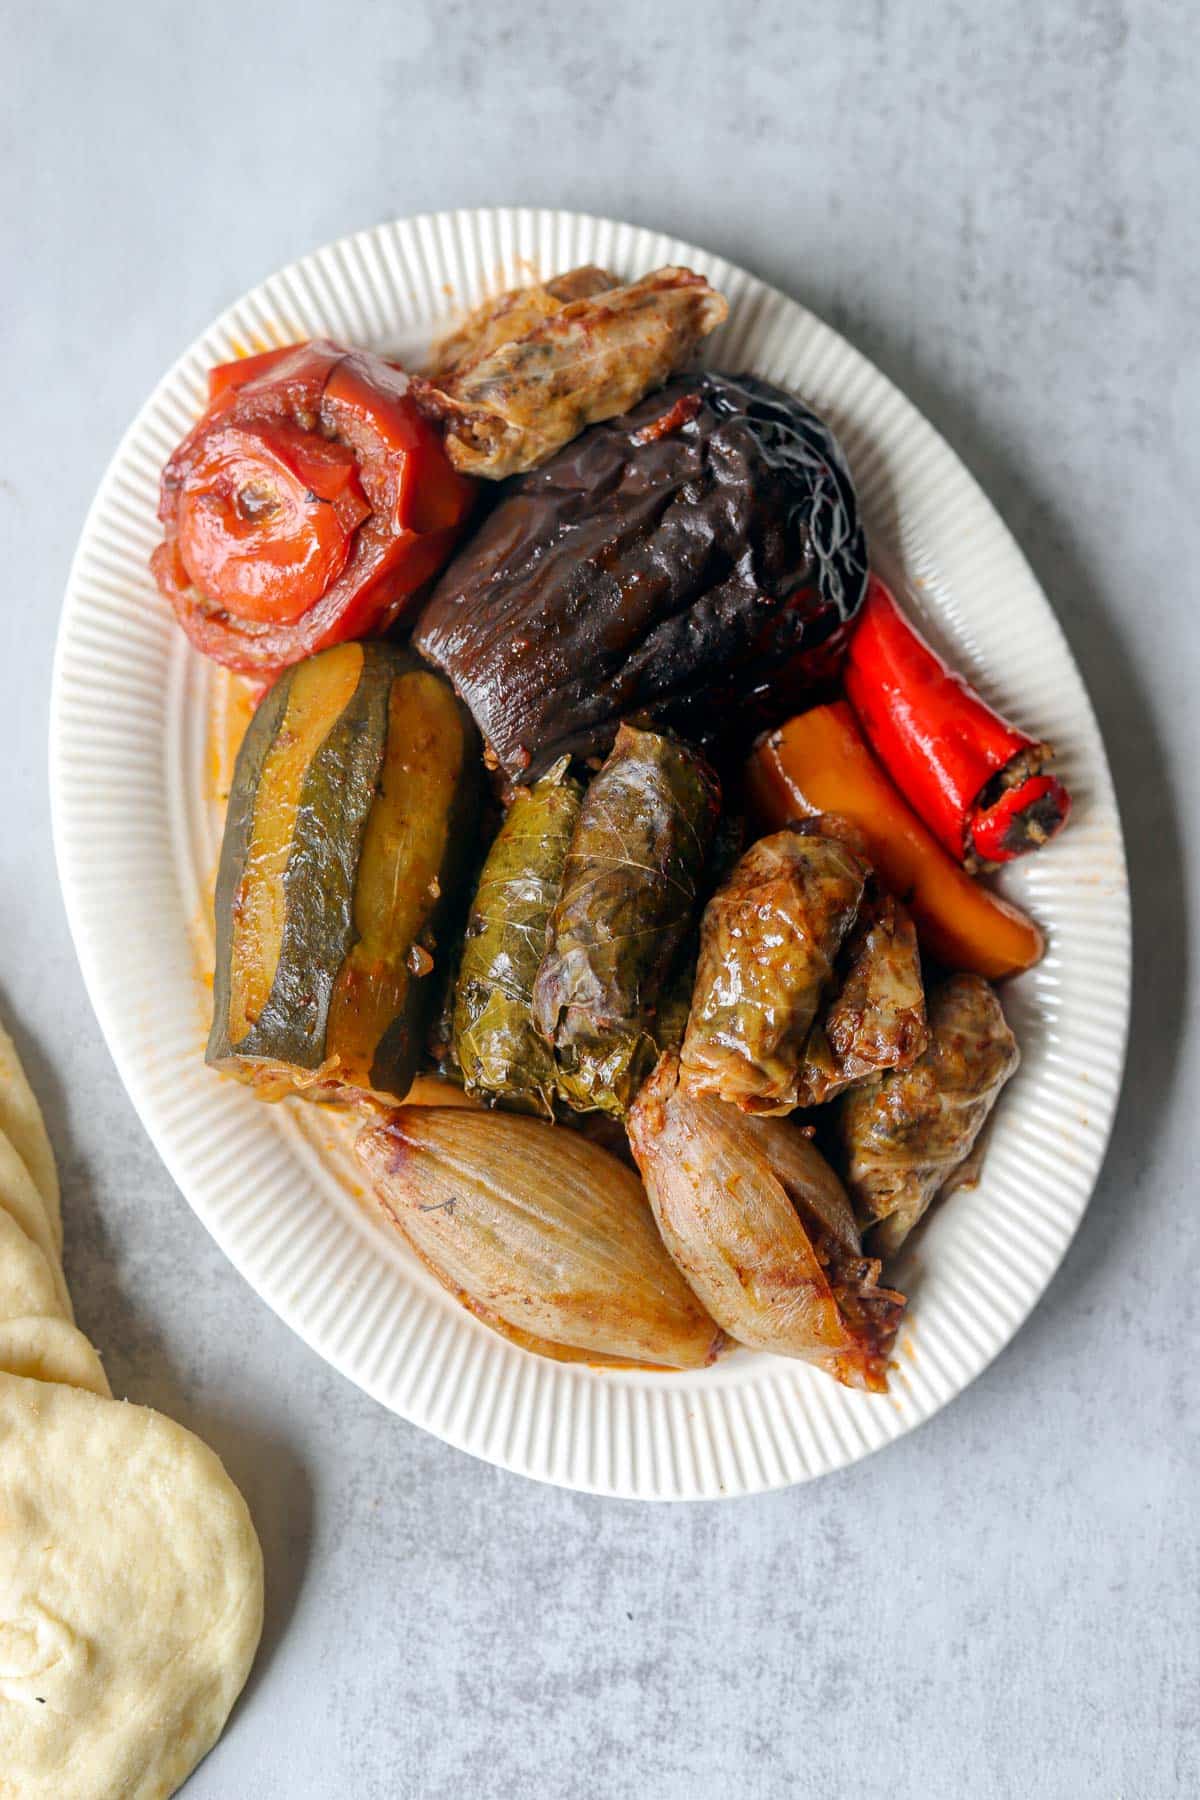 Iraqi Dolma on a white plate with pita bread next to it